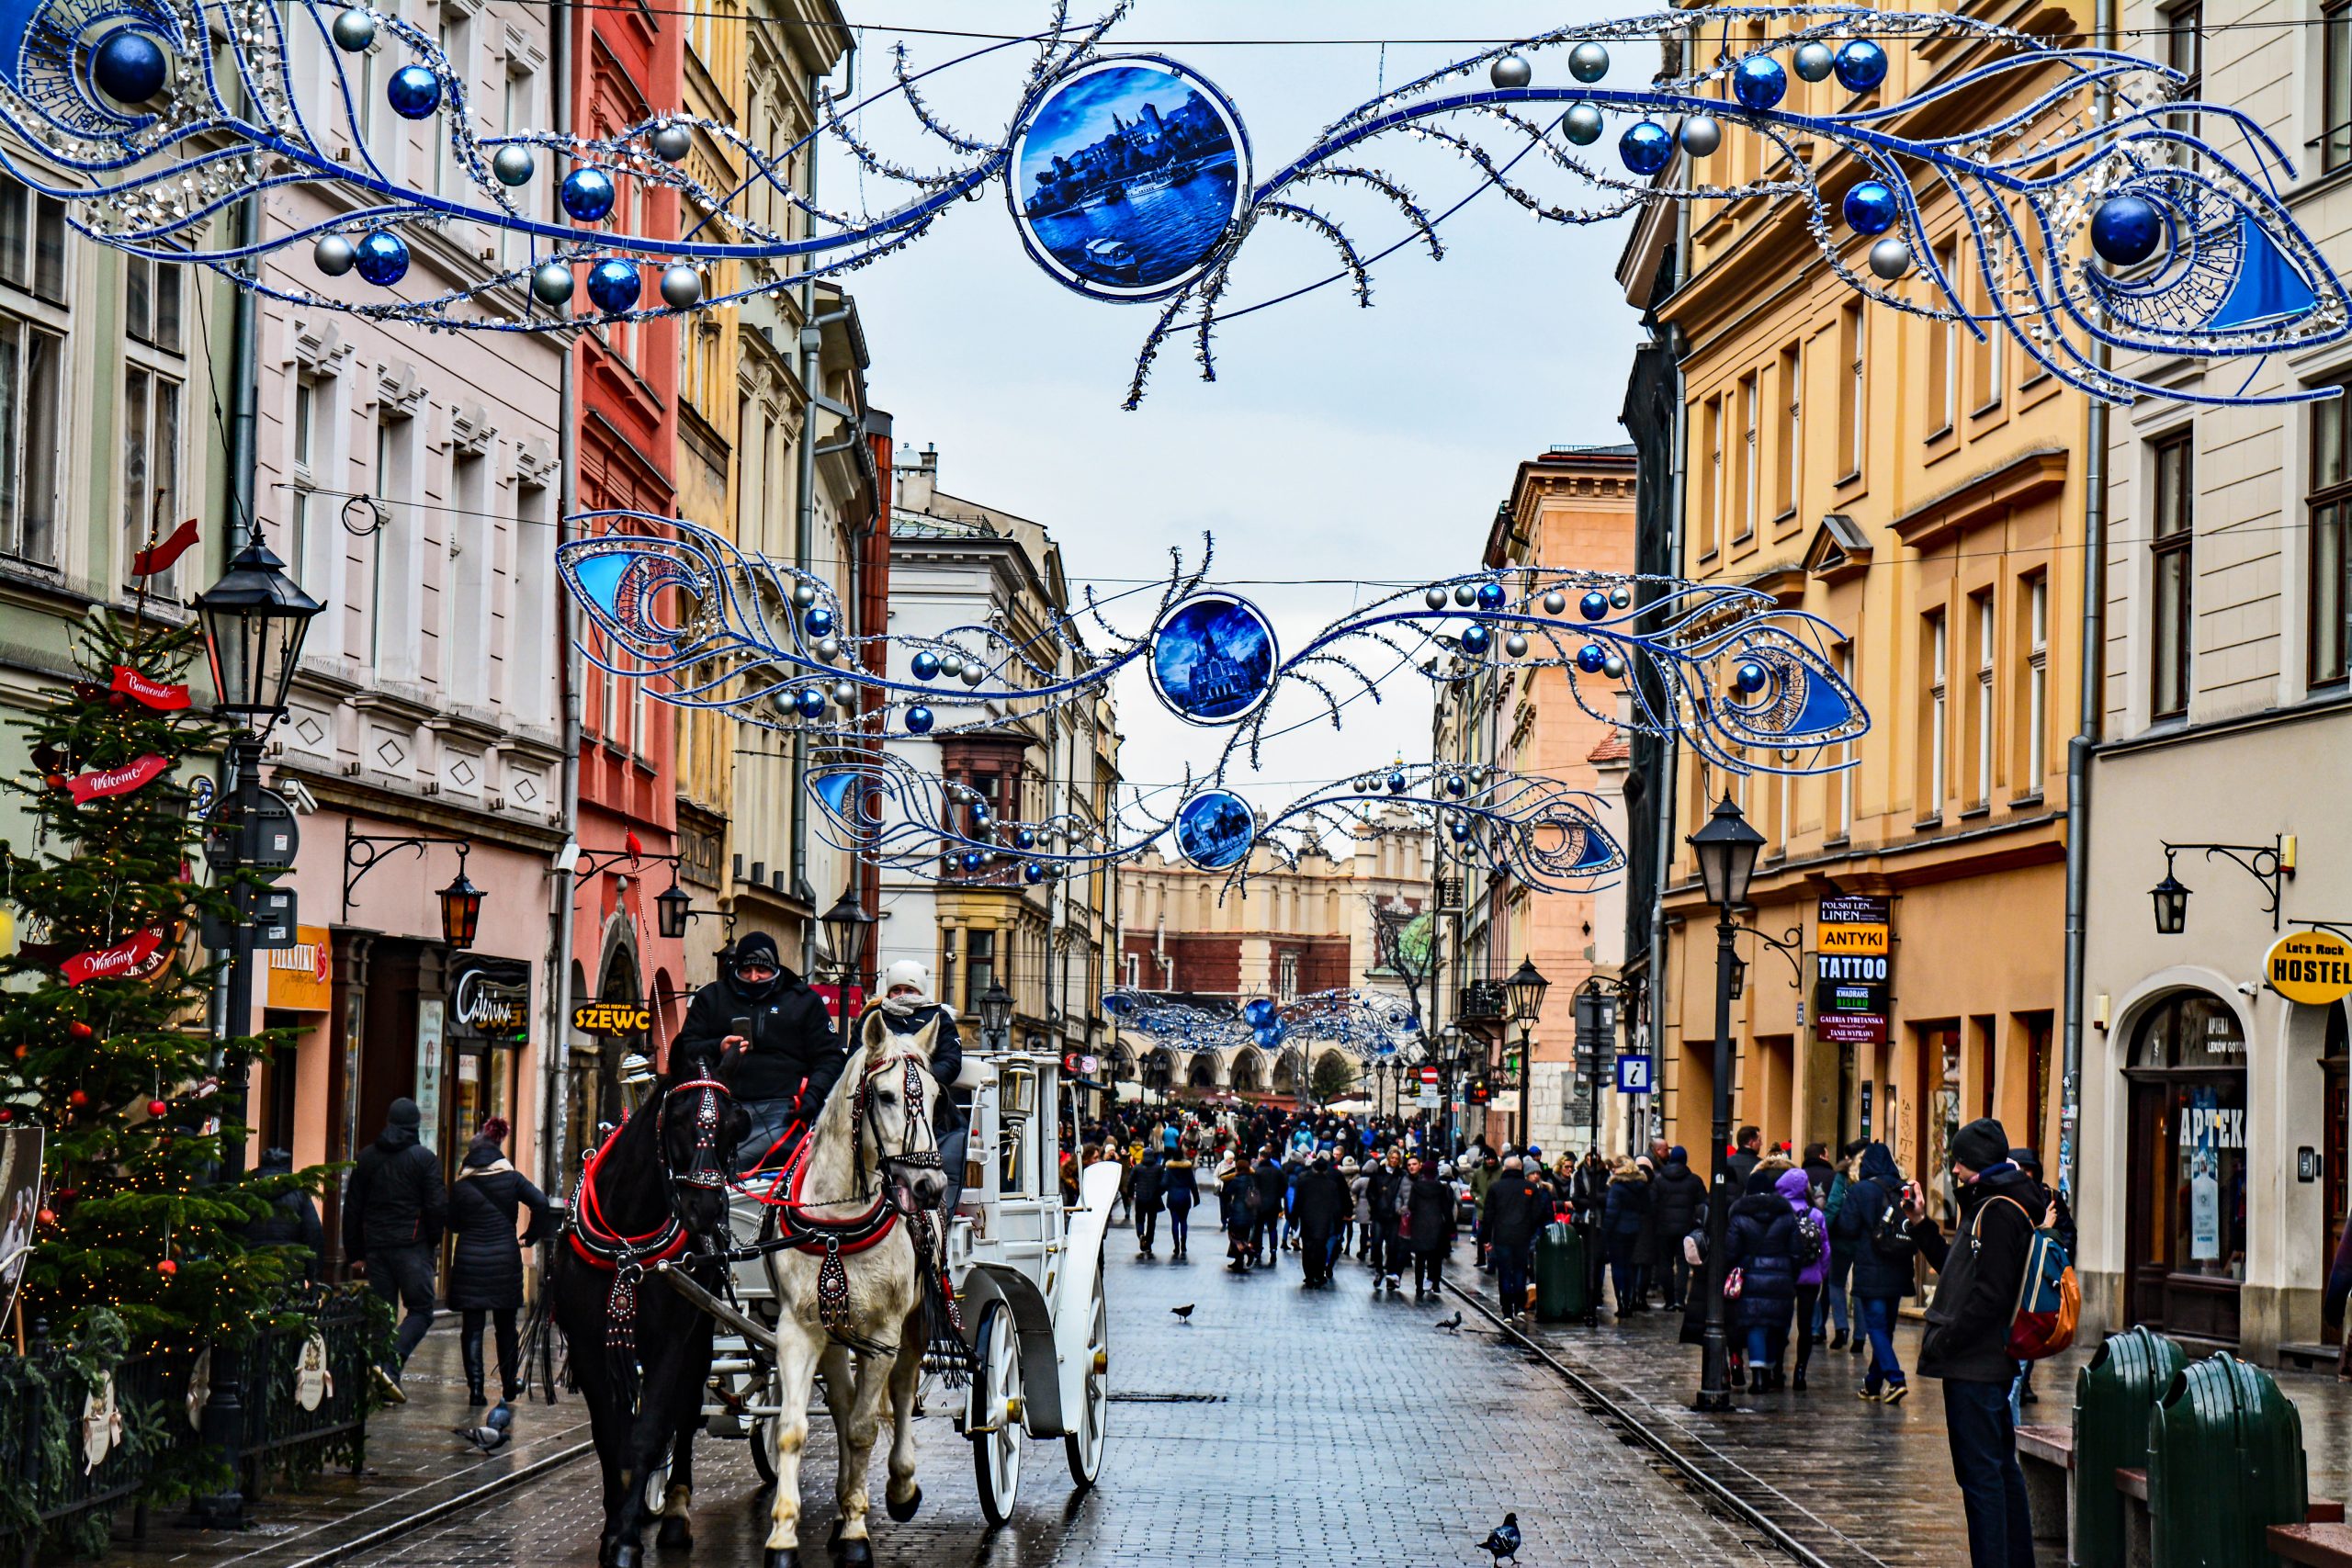 Krakow, Poland has one of the best Christmas Markets in Europe